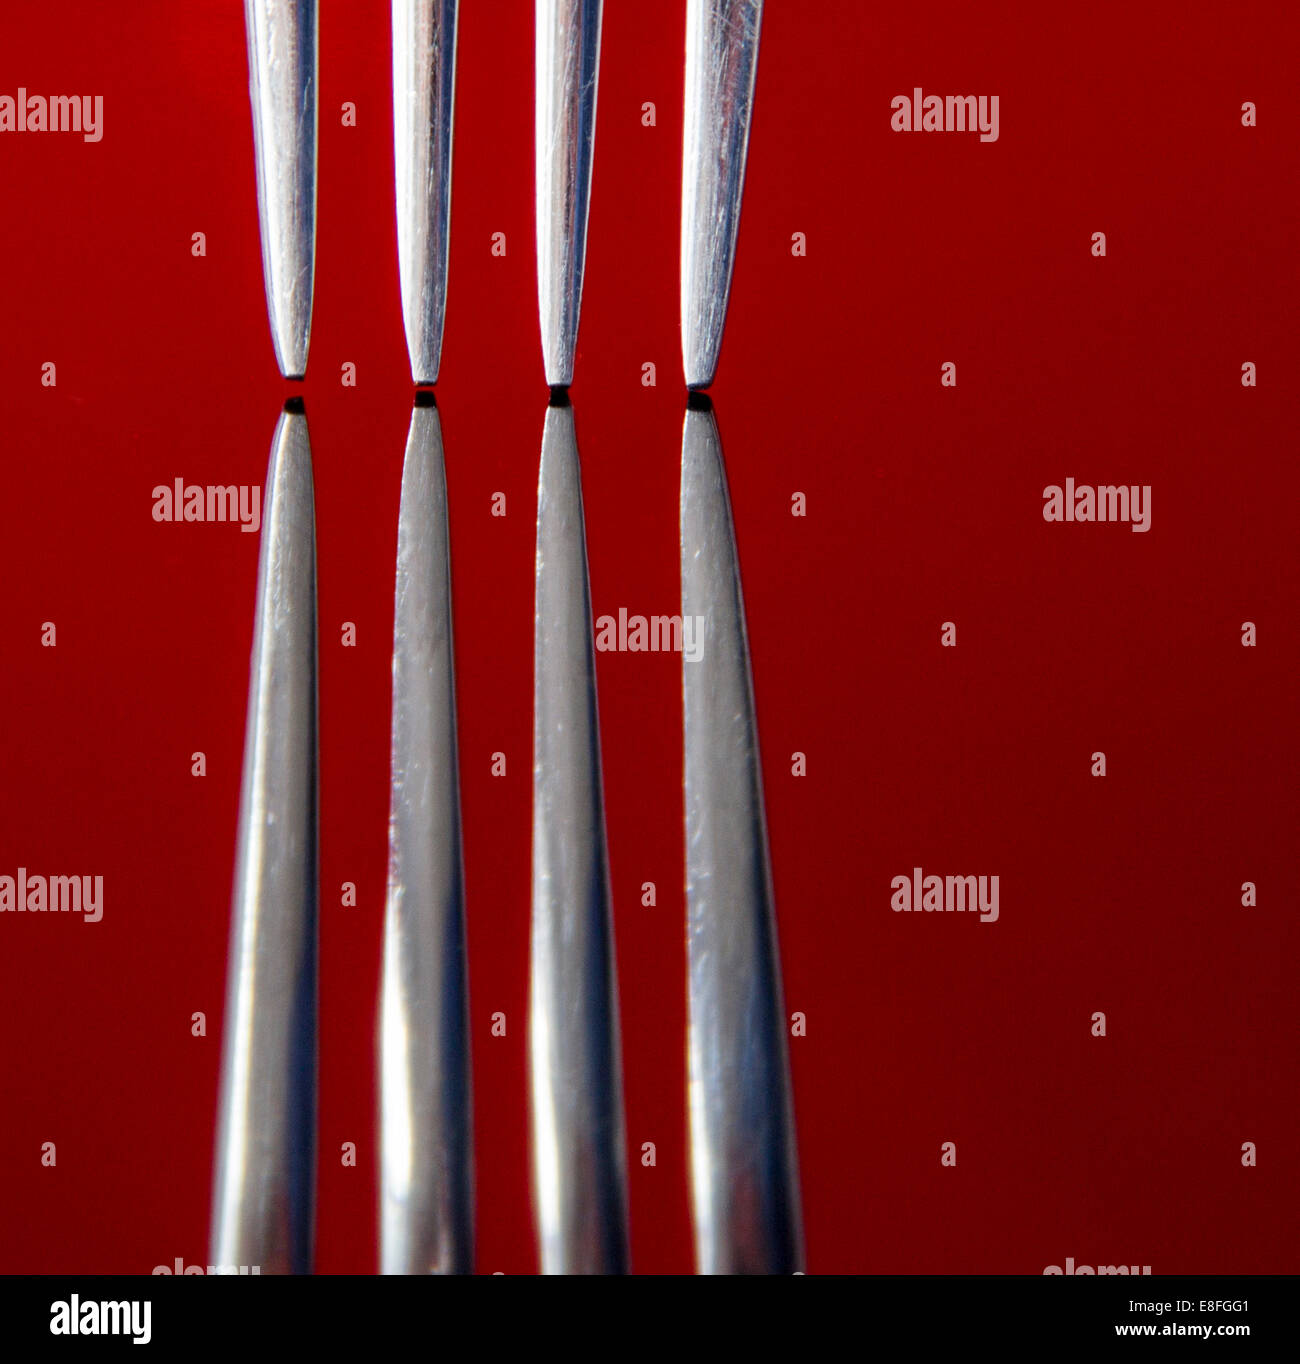 Close up of fork prongs on red reflective surface, studio shot Stock Photo